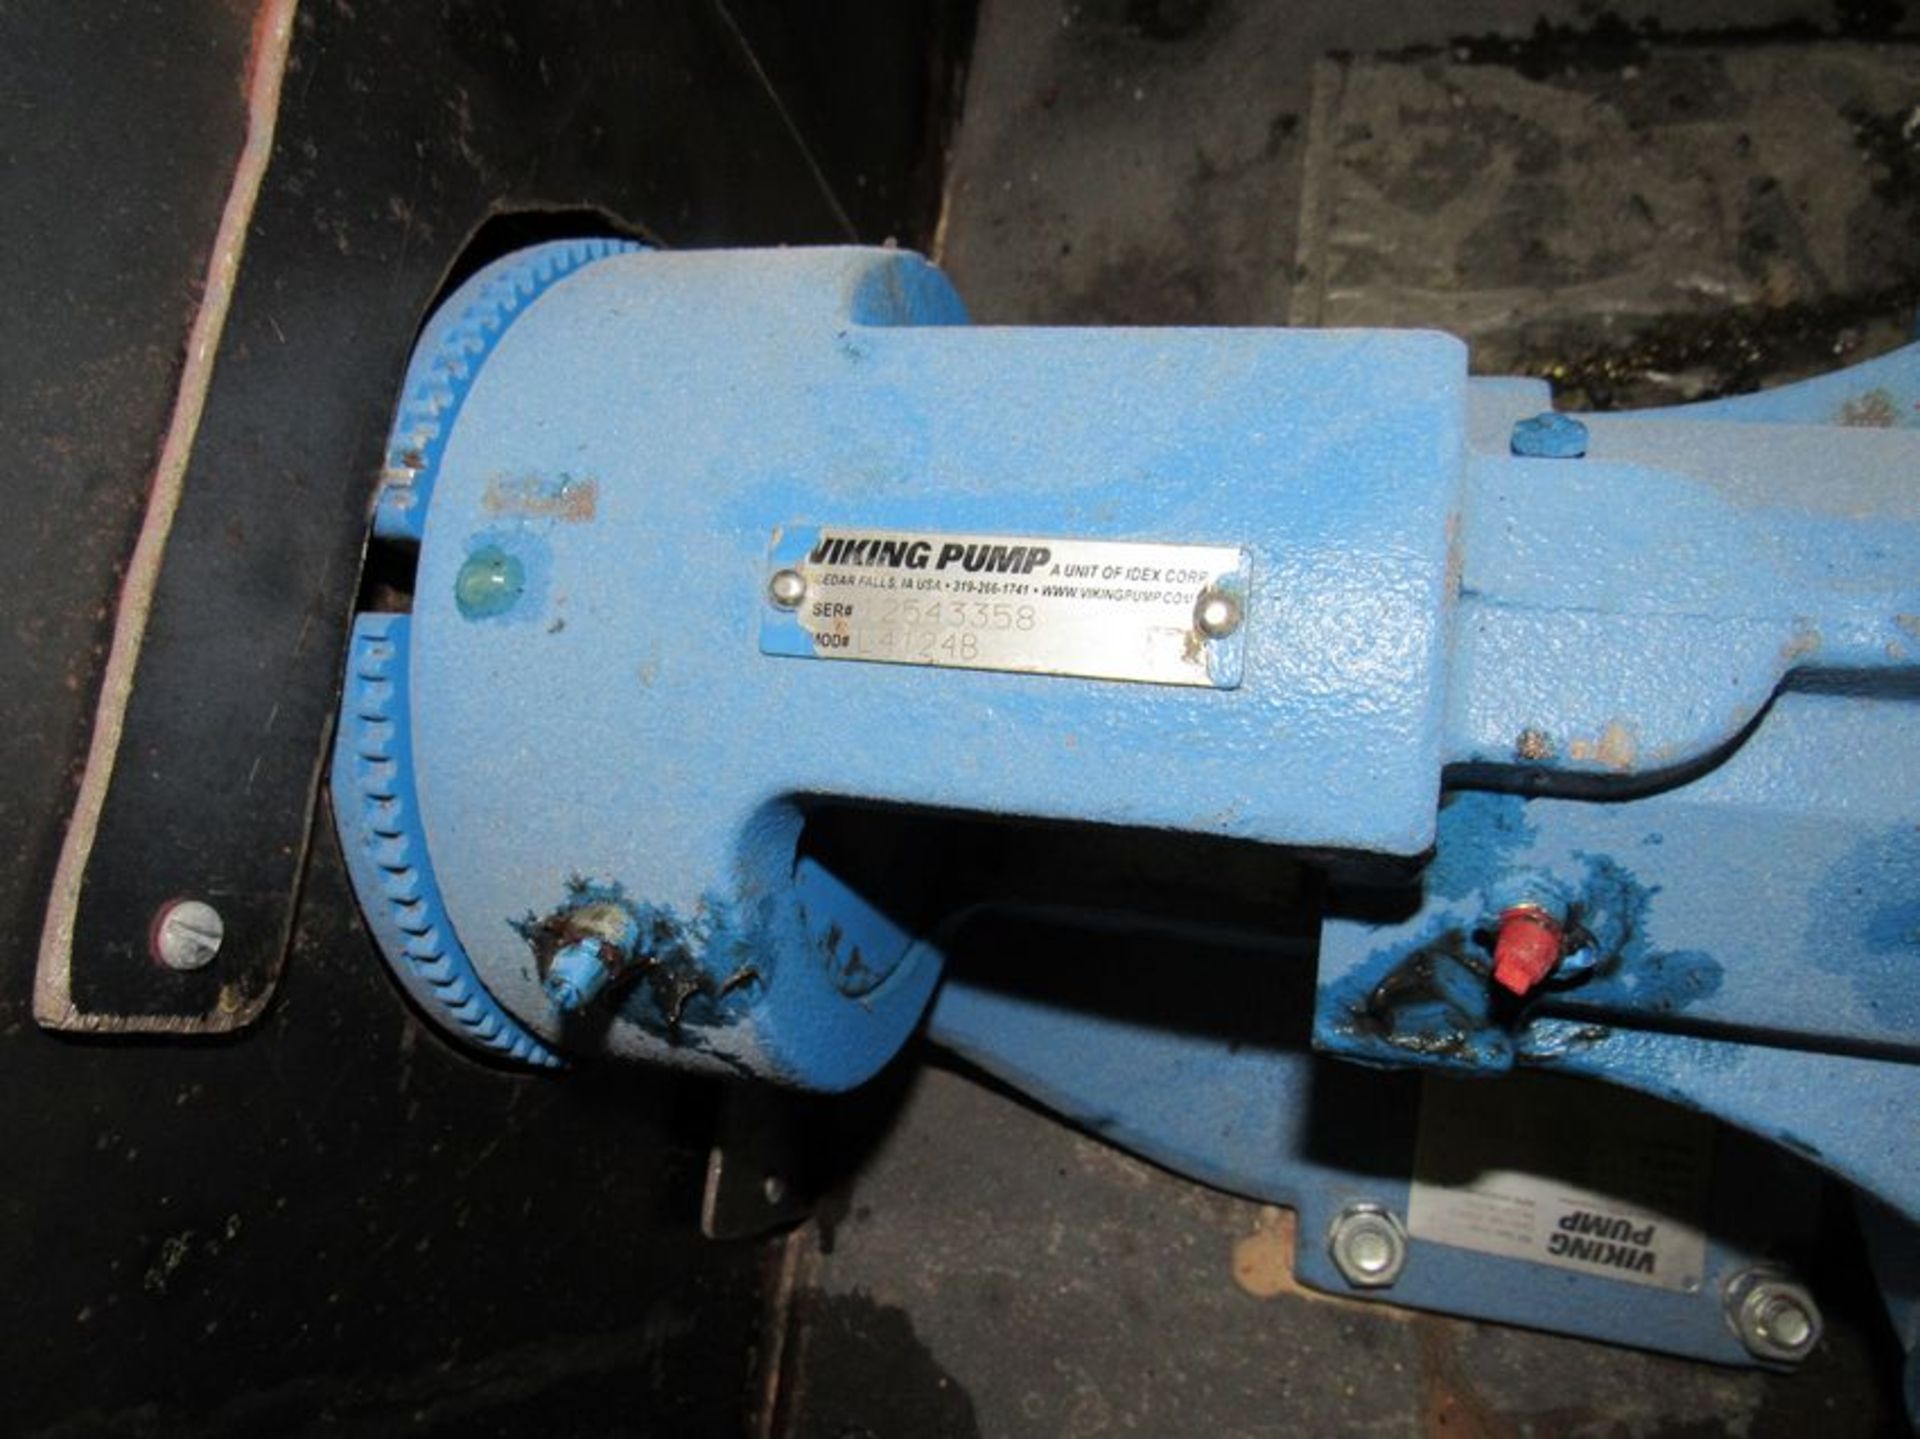 Viking Pump Model L4124B, Serial #12543358, 2" inlet and outlet with relief valve, 3HP Motor -Free - Image 4 of 14